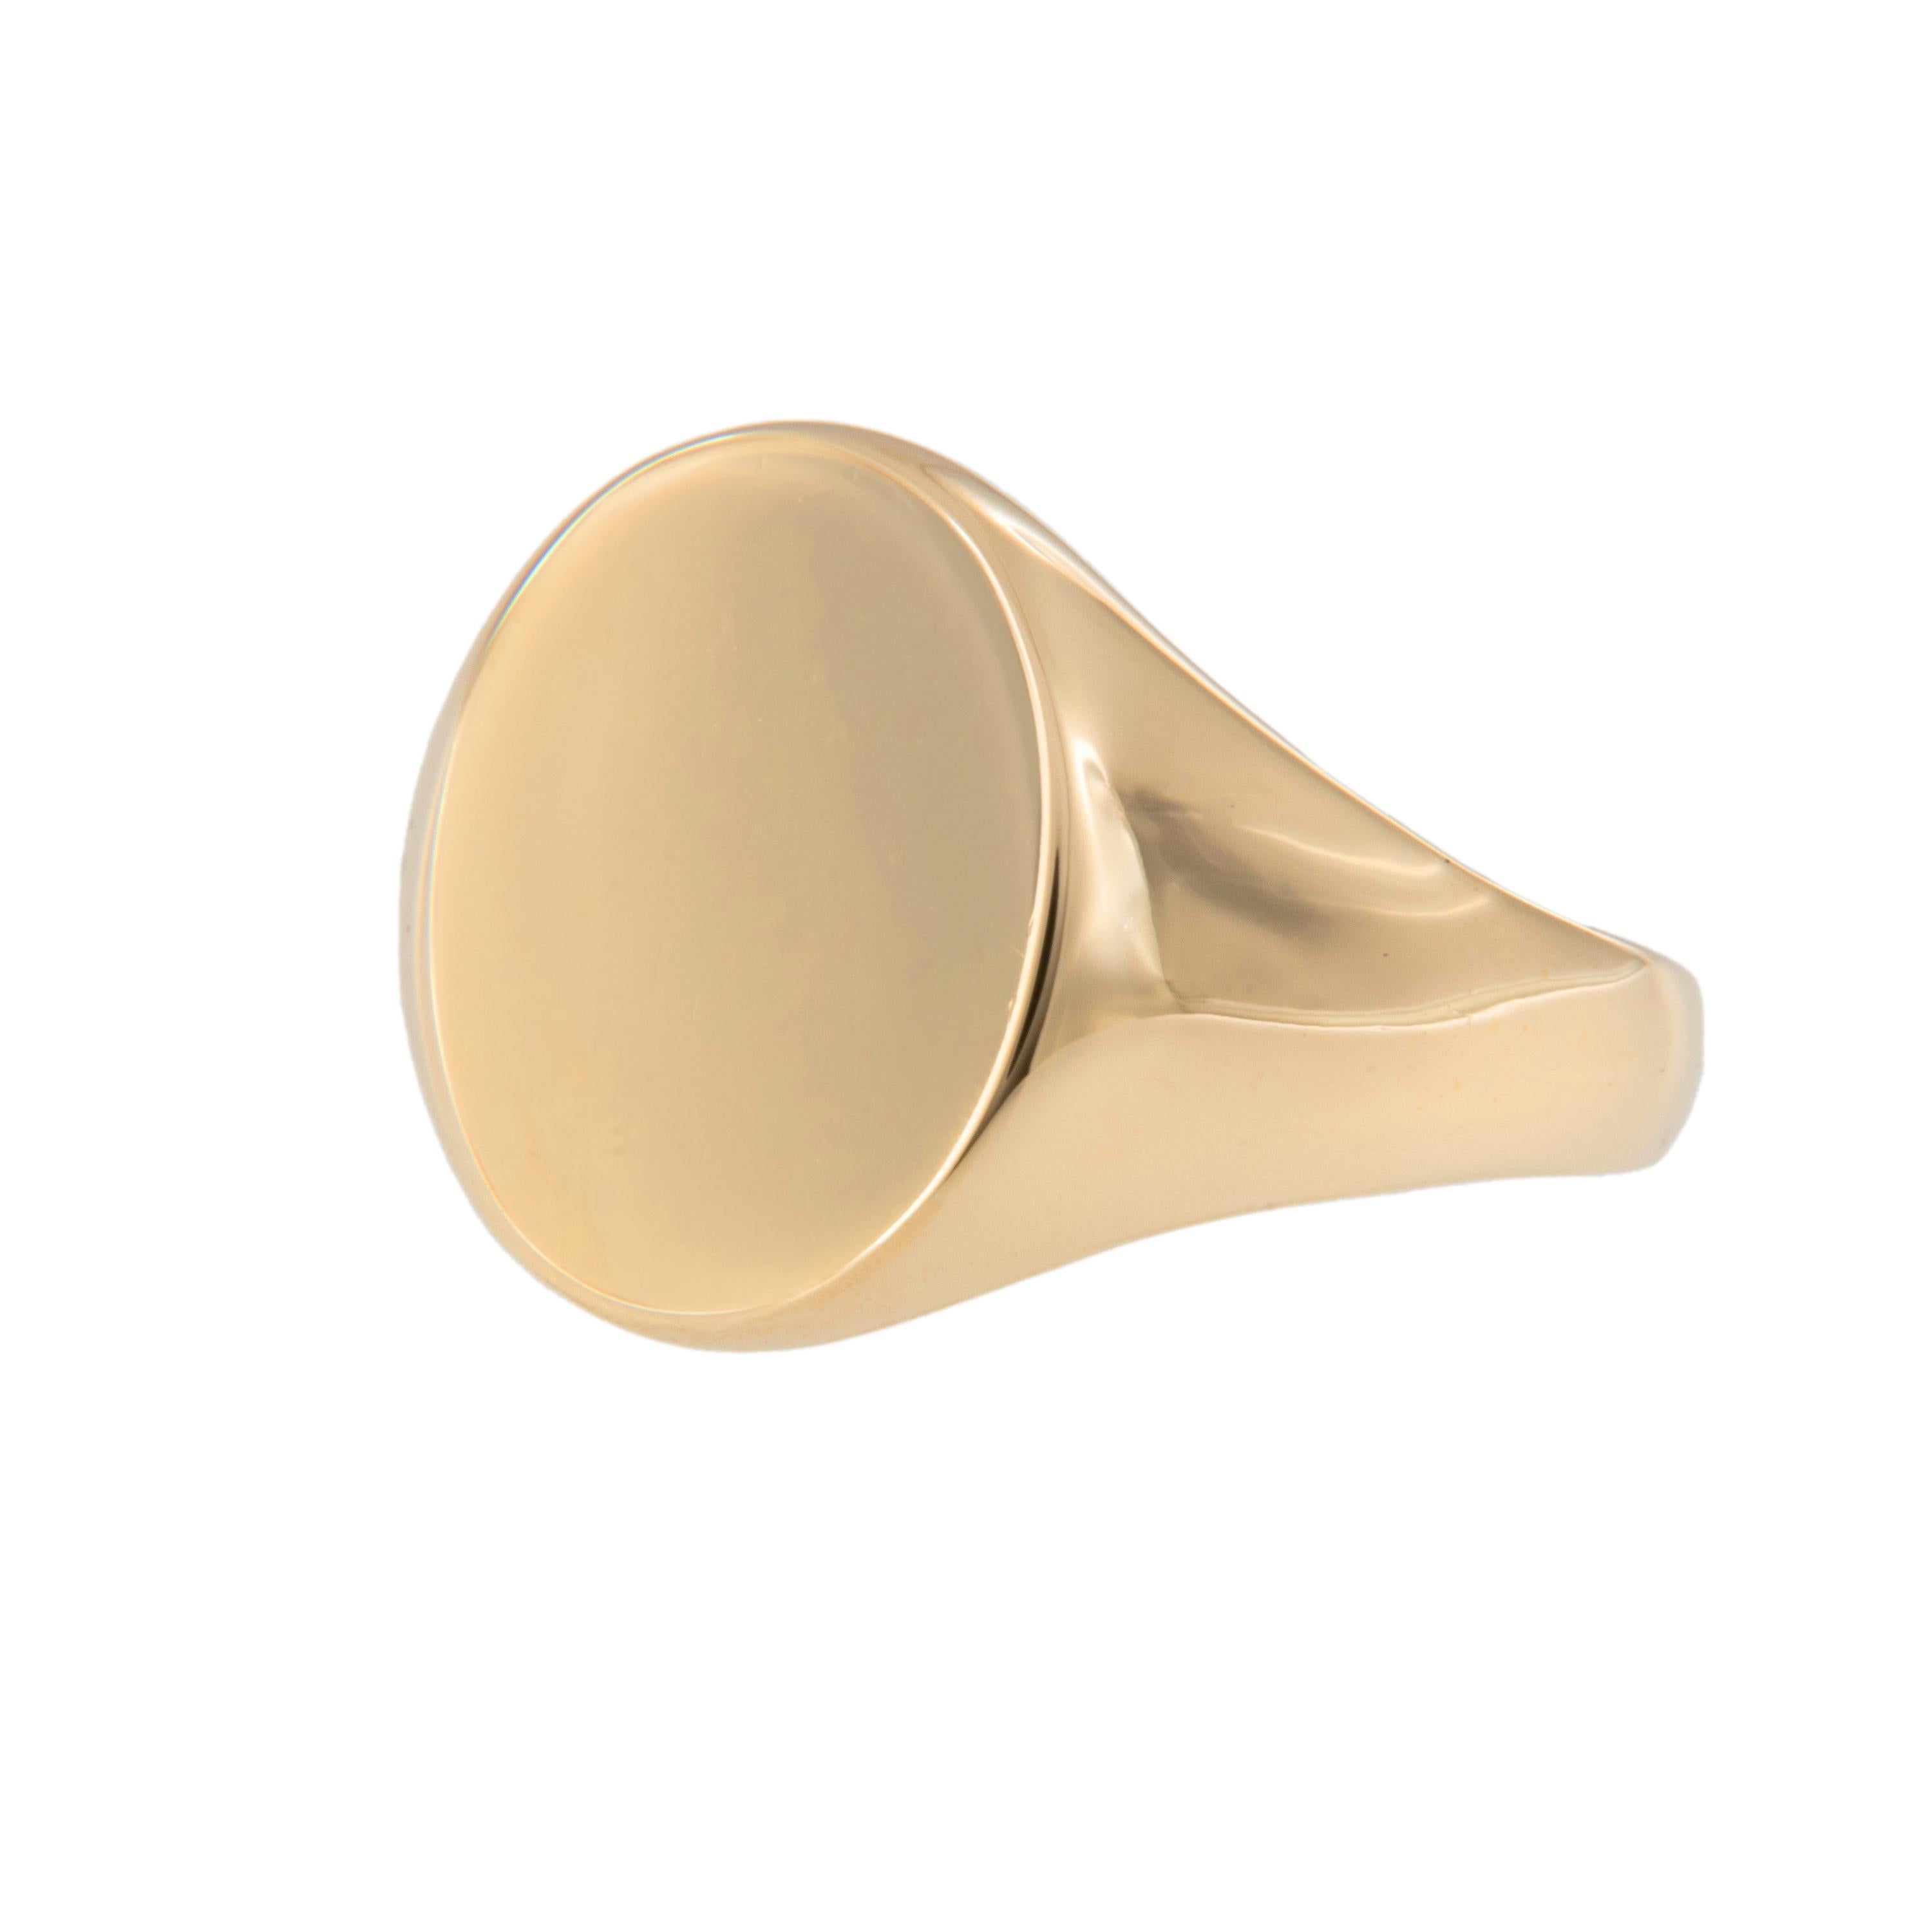 Signet rings have been around for millenniums when ancient Pharaohs wore them to signify position in society. Used for many years by nobility to sign all letters and legal documents or used to seal closed documents. You can own & design this blank